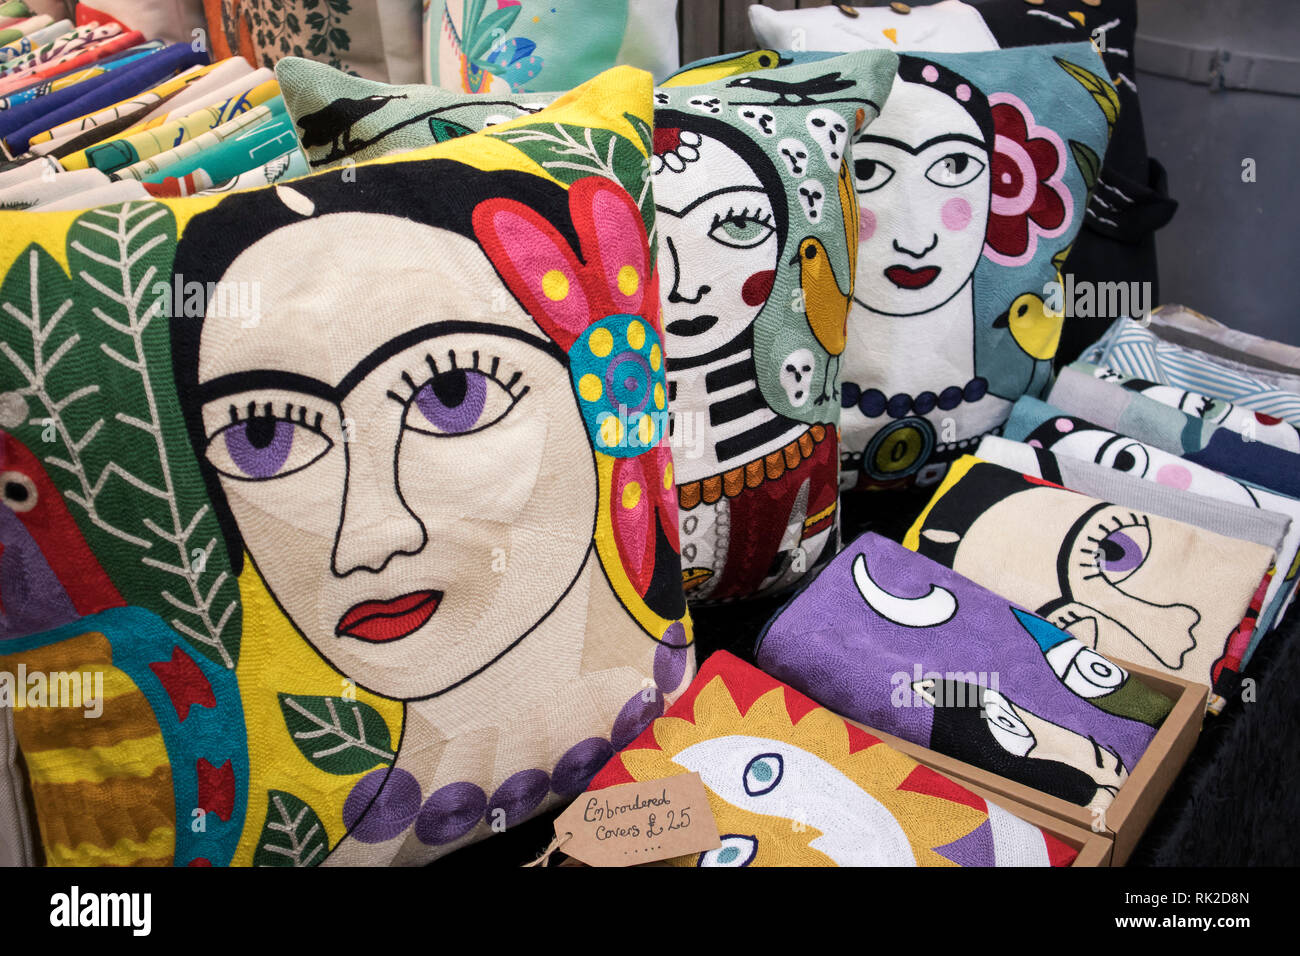 London England December 12 18 Multicolored Pillows In The Style Of Frida Kahlo In The Store Stock Photo Alamy